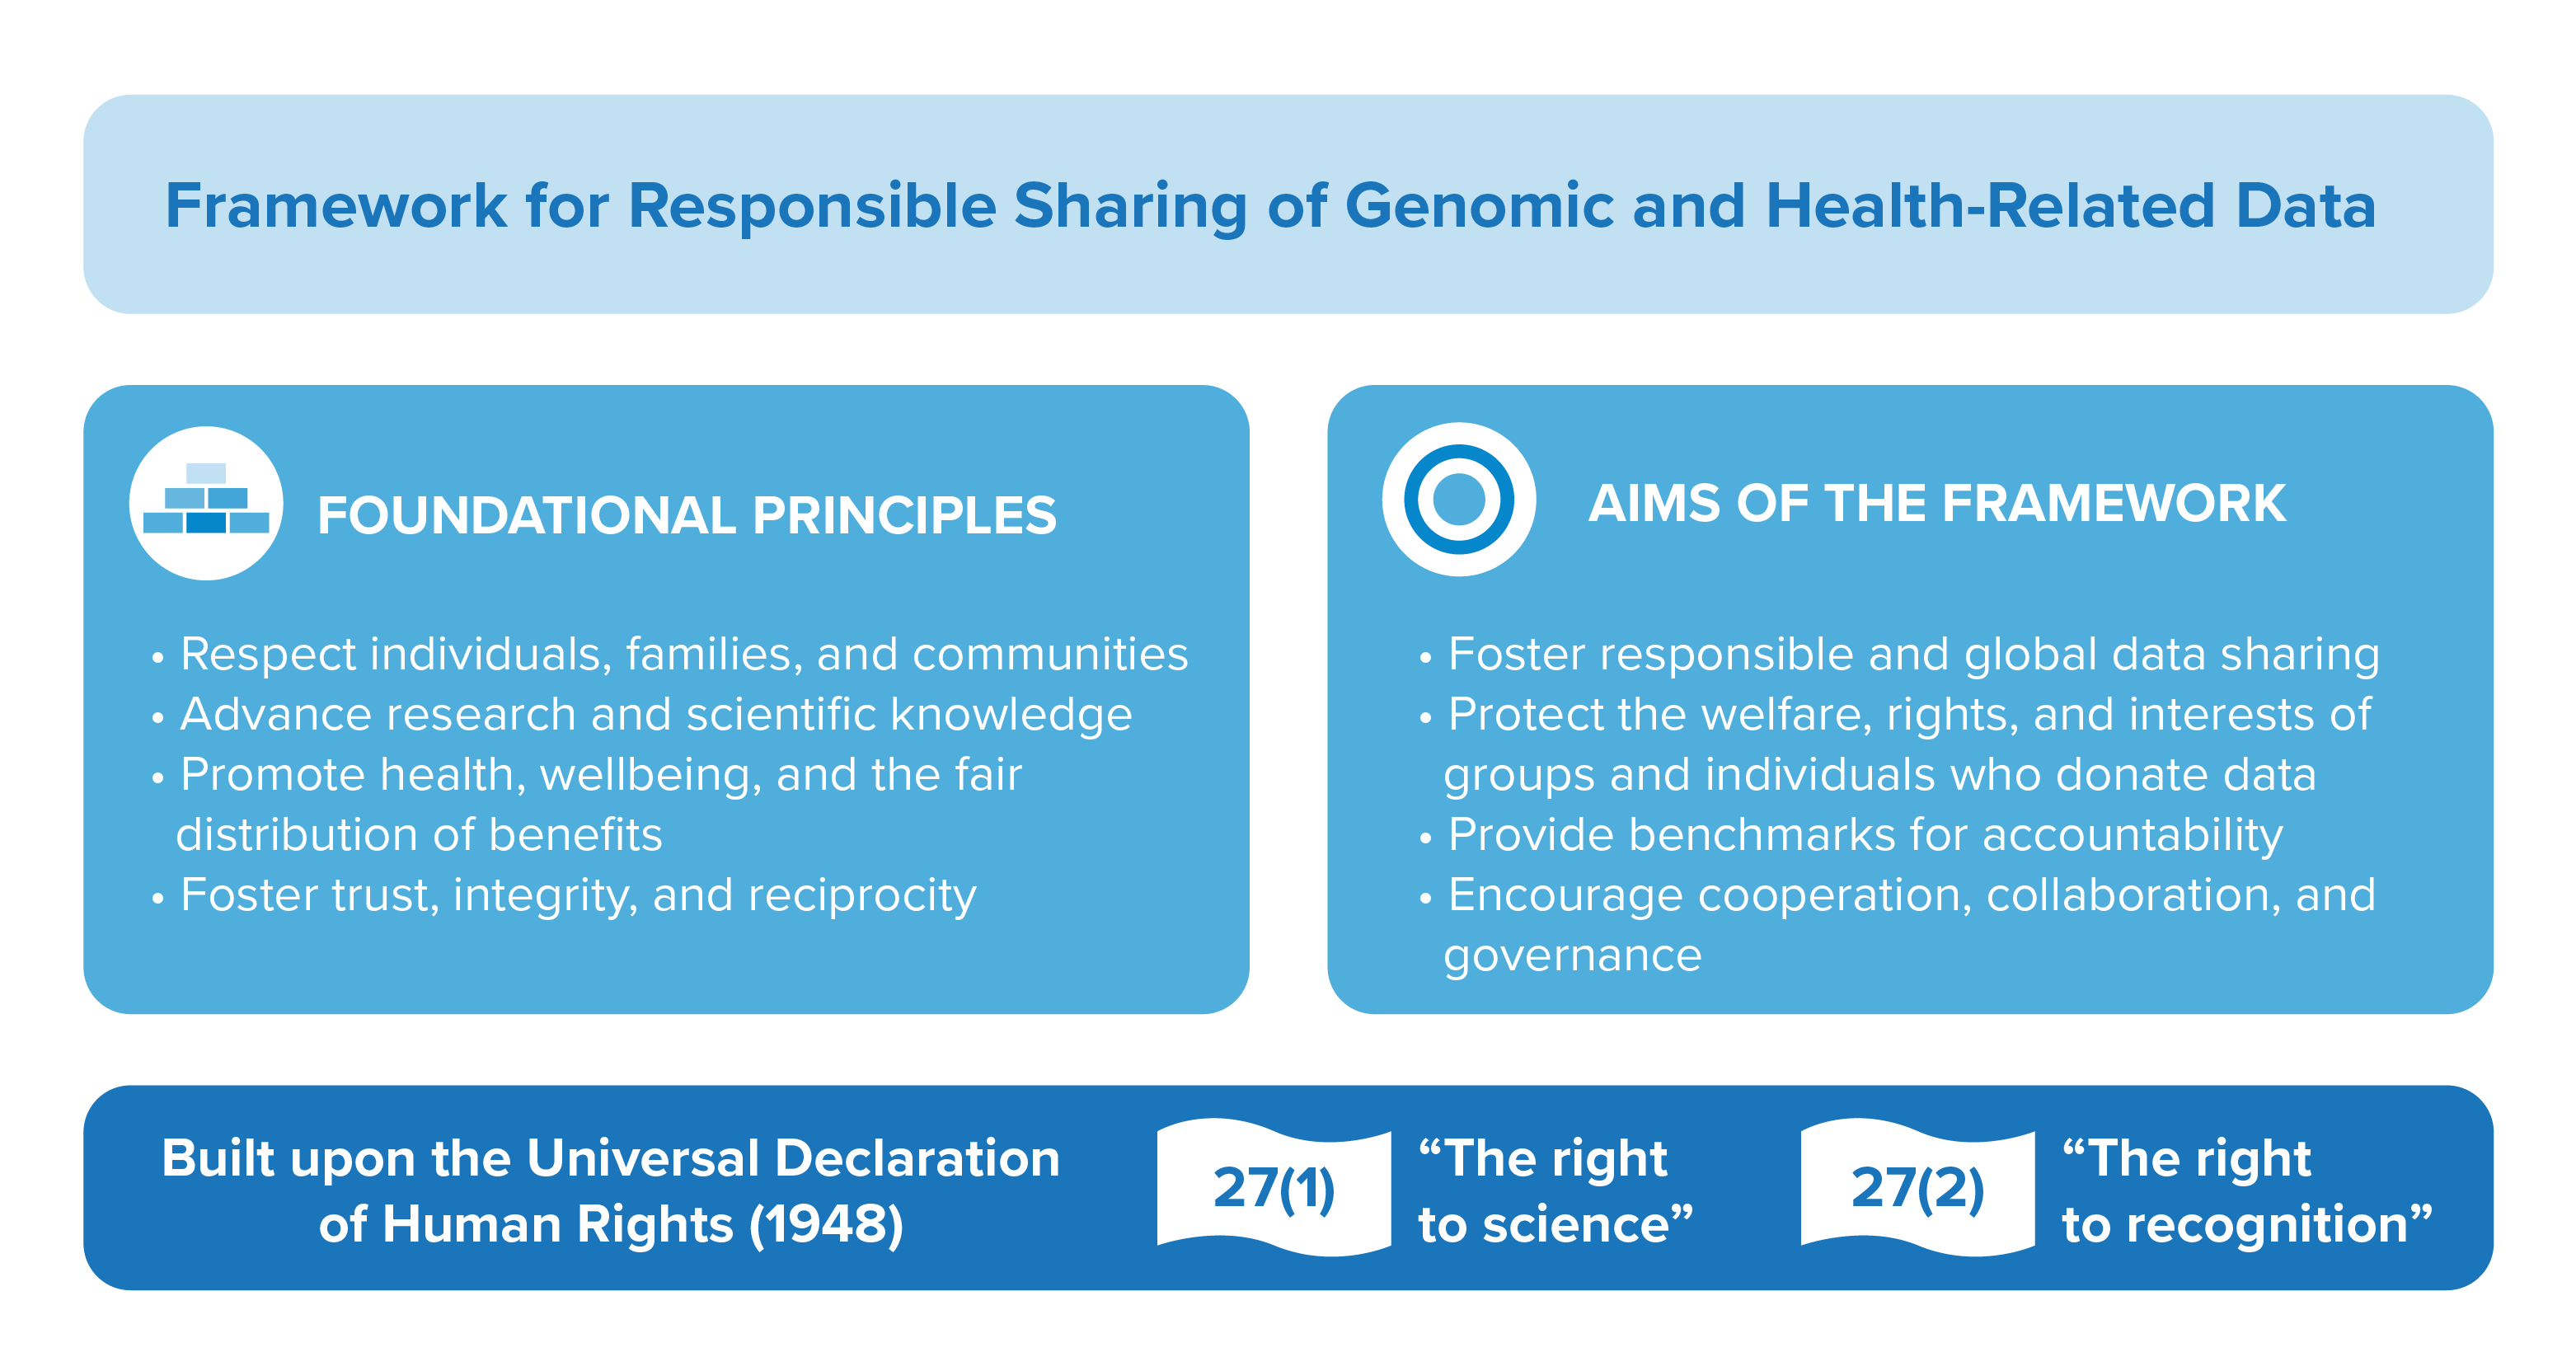 A diagram depicting the foundational principles and aims of the Framework for Responsible Sharing of Genomic and Health-Related Data — which is built upon the Universal Declaration of Human Rights.